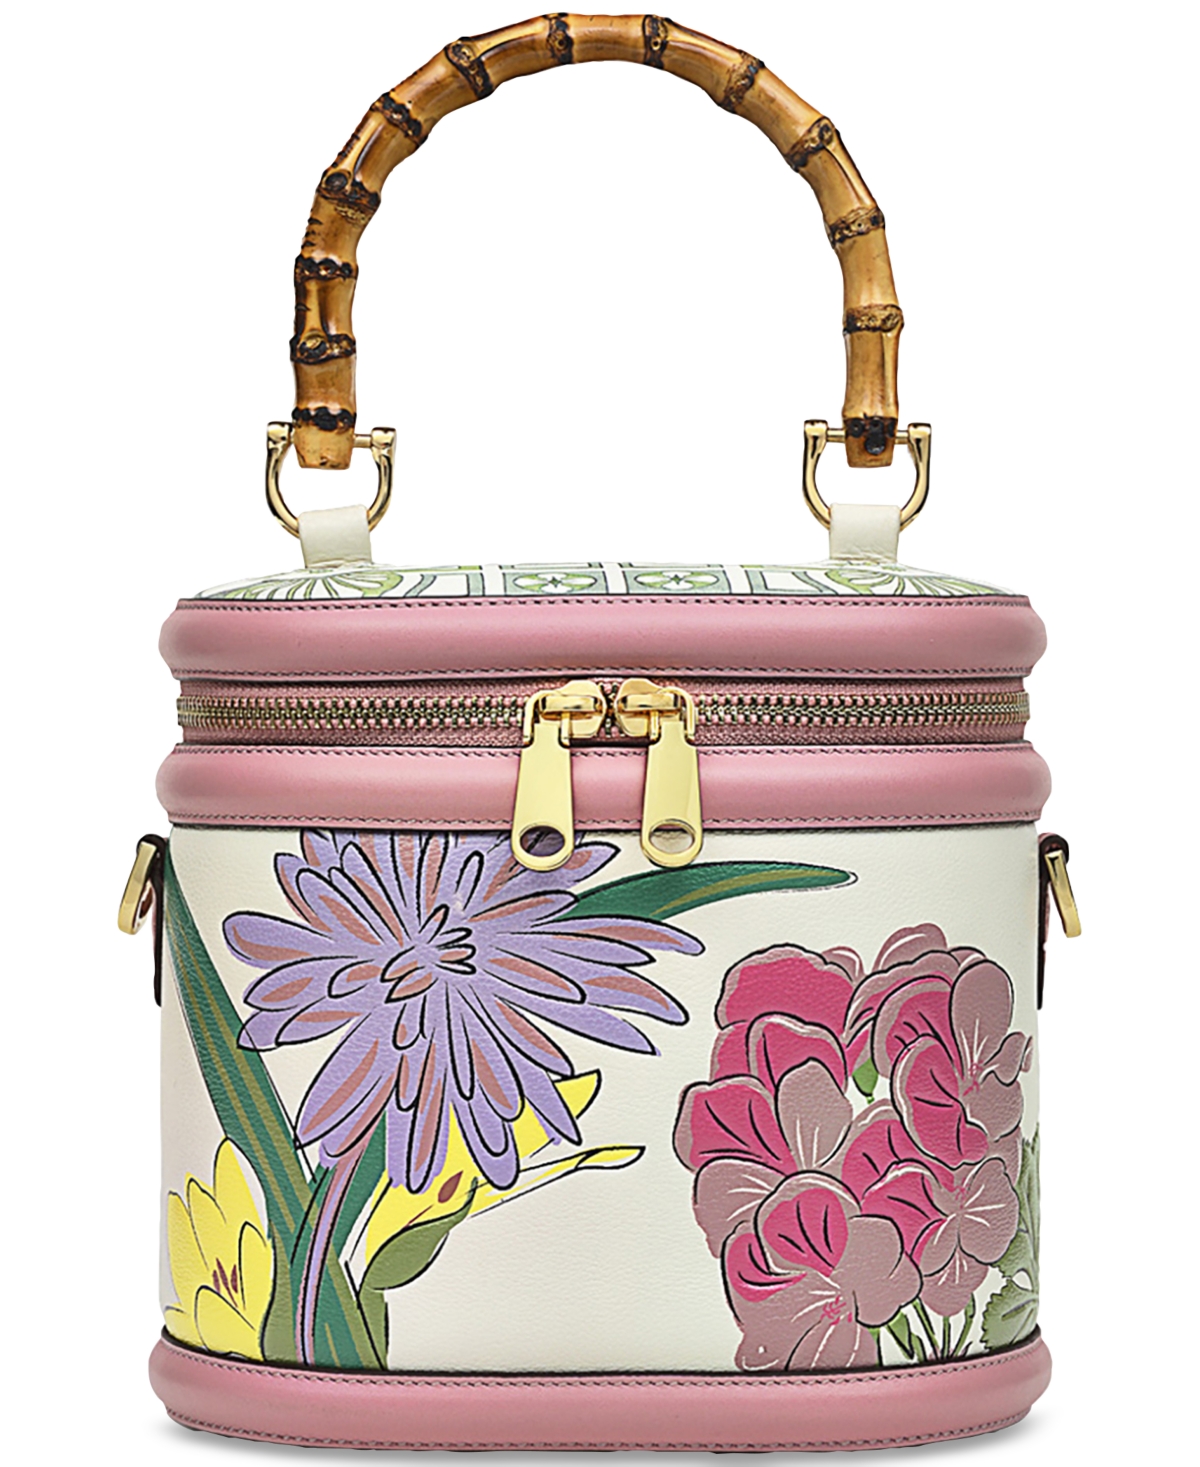 Radley London The Rhs Collection Leather Zip Around Crossbody In Chalk